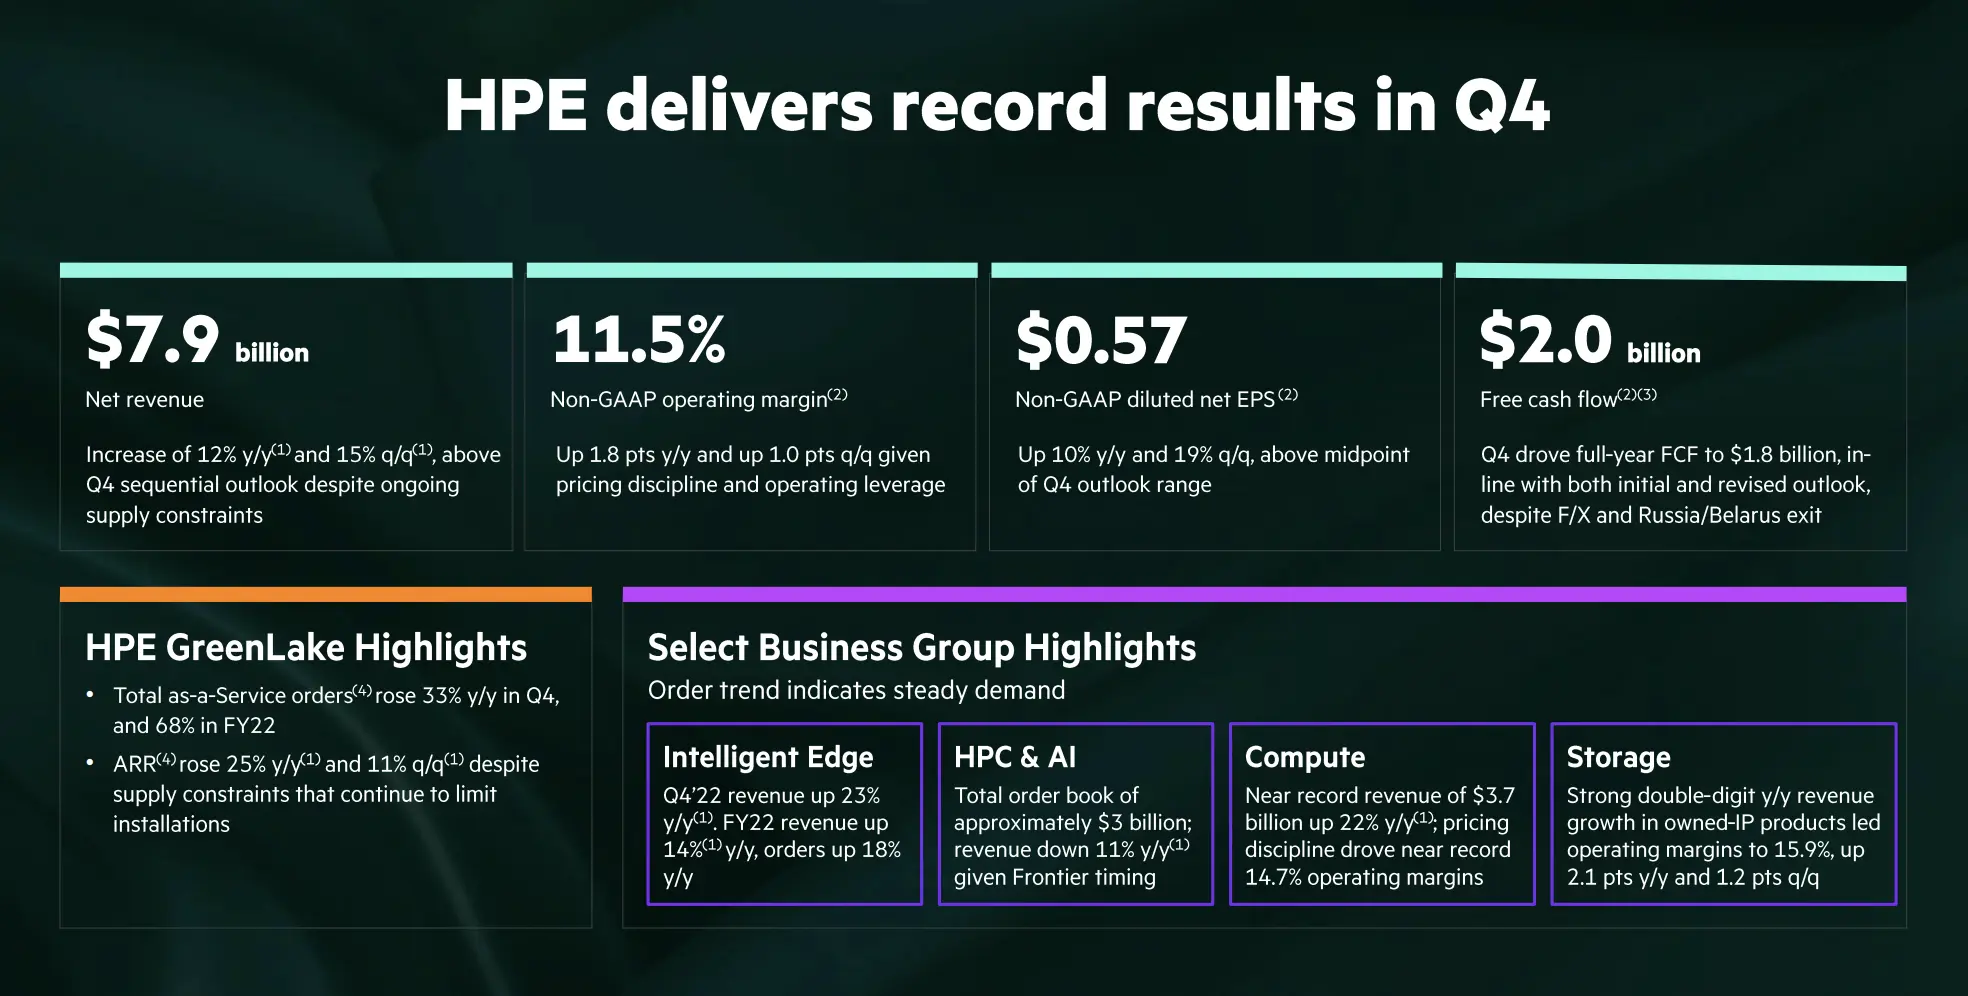 hewlett packard enterprise results - What are the results of HPE 2023